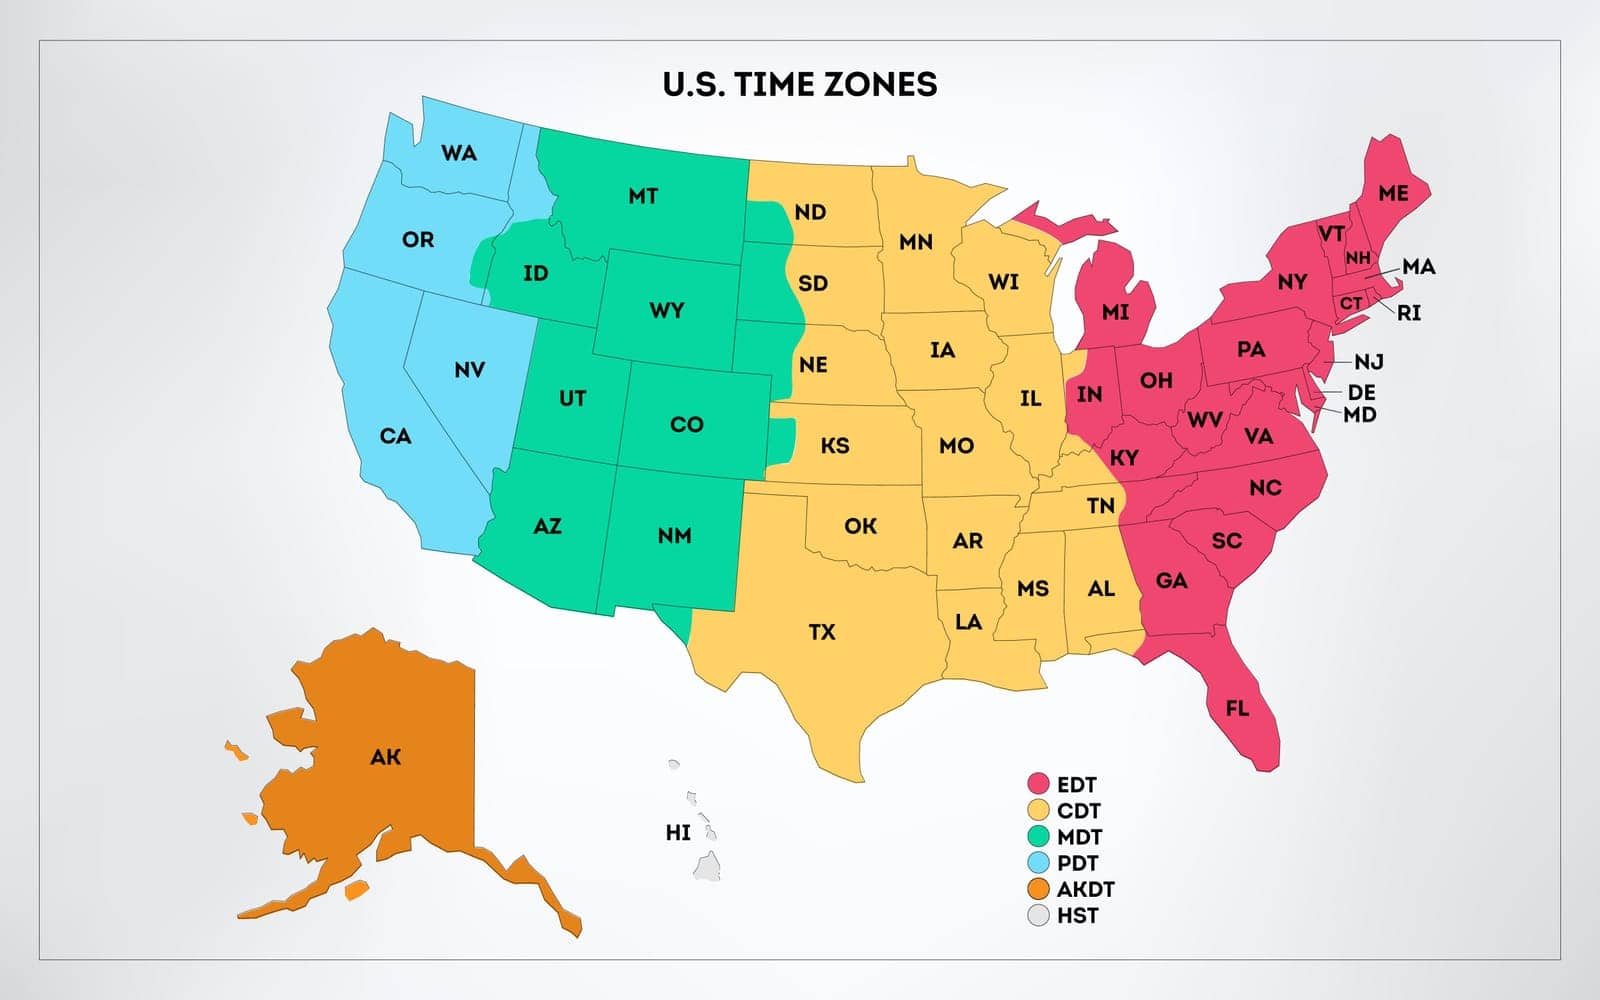 USA time zones infographic map. Colorful United States of America geography time zones. Stock vector illustration isolated on white background. by Kyrylov